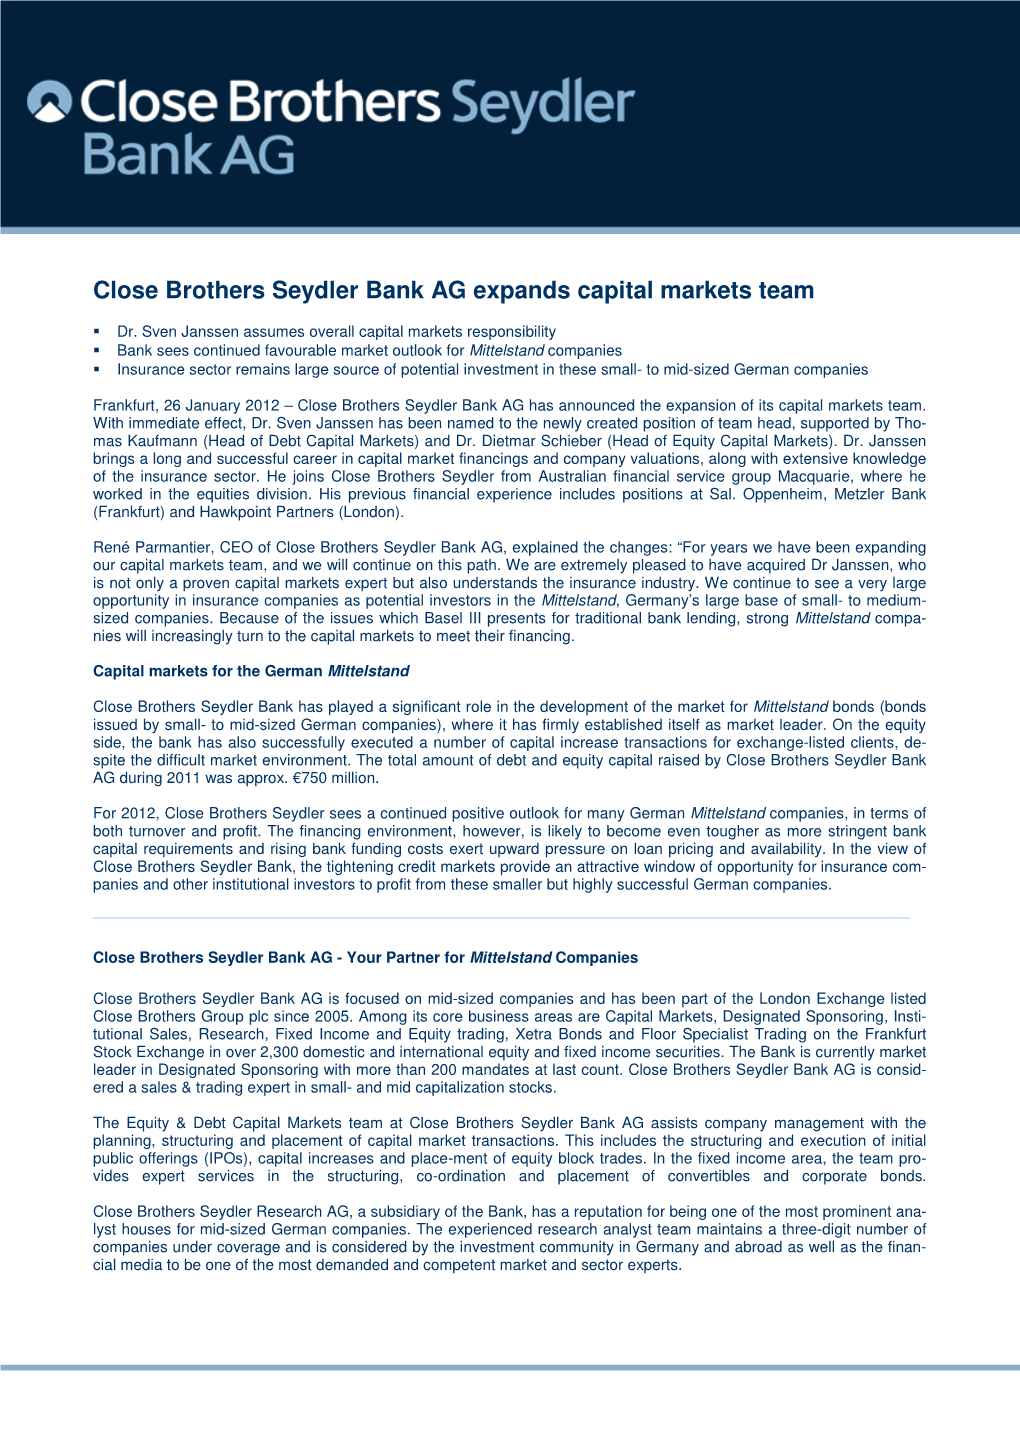 Close Brothers Seydler Bank AG Expands Capital Markets Team